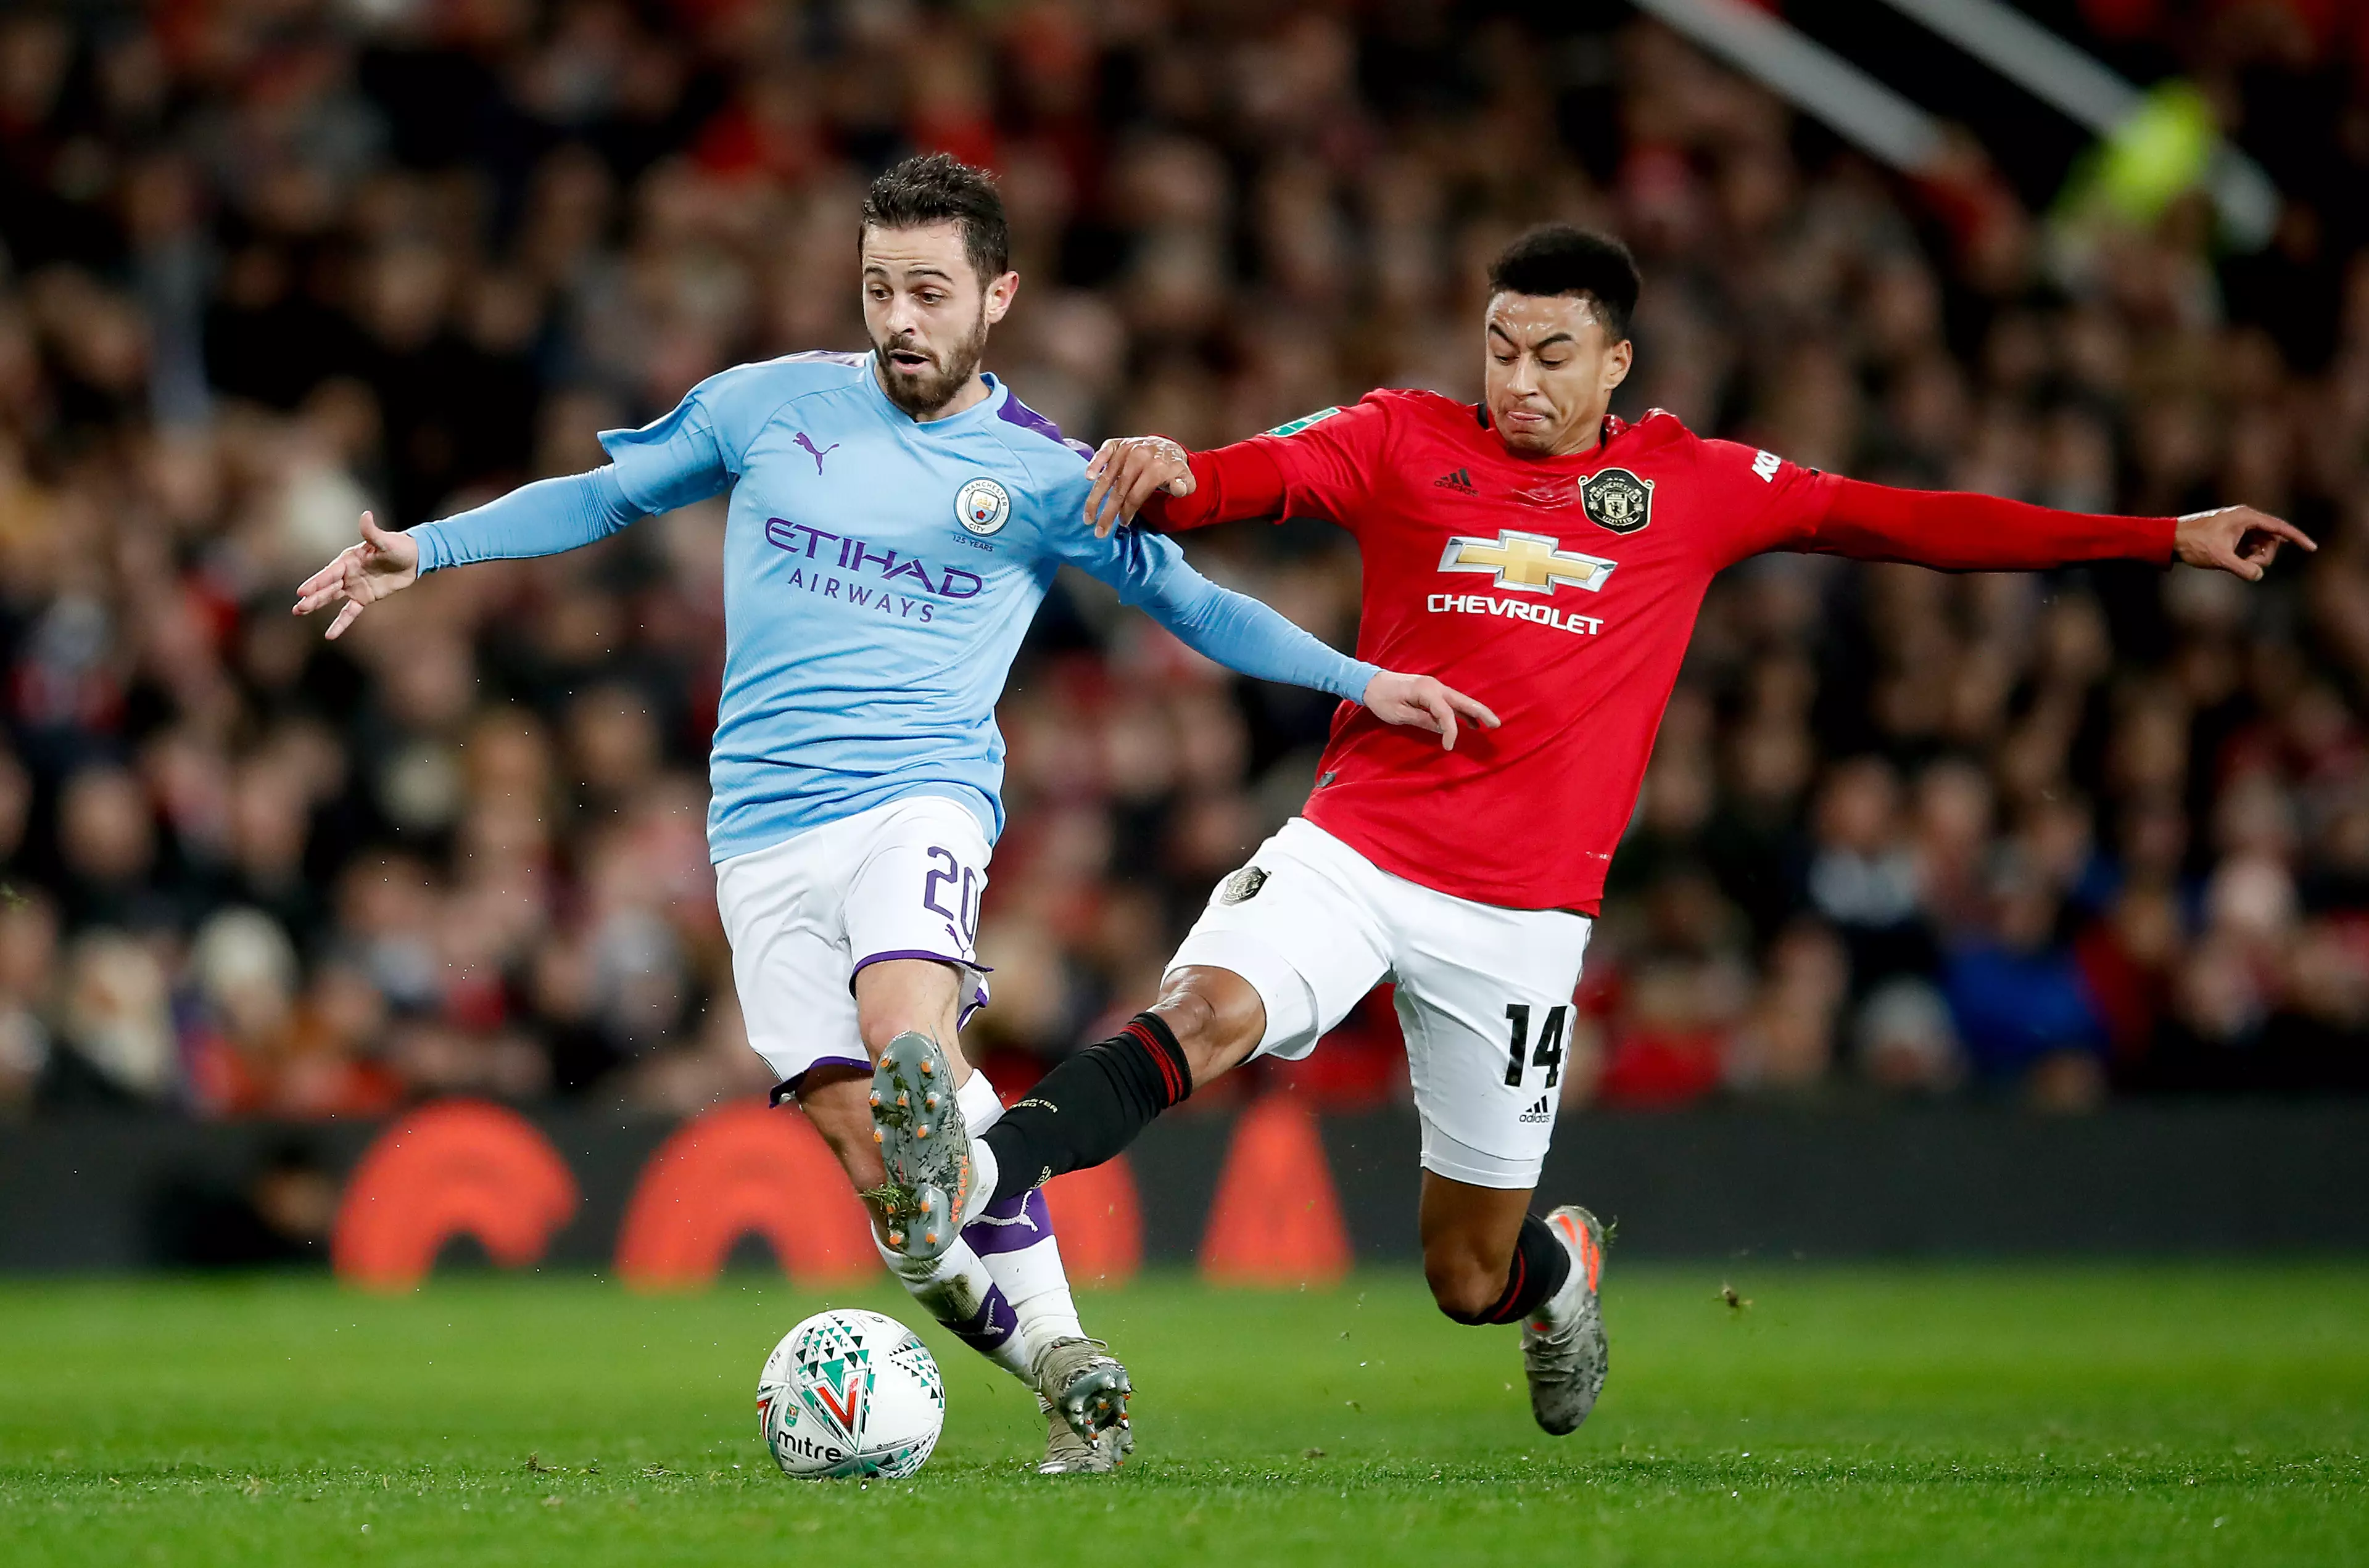 Lingard vs Silva during the game. Image: PA Images